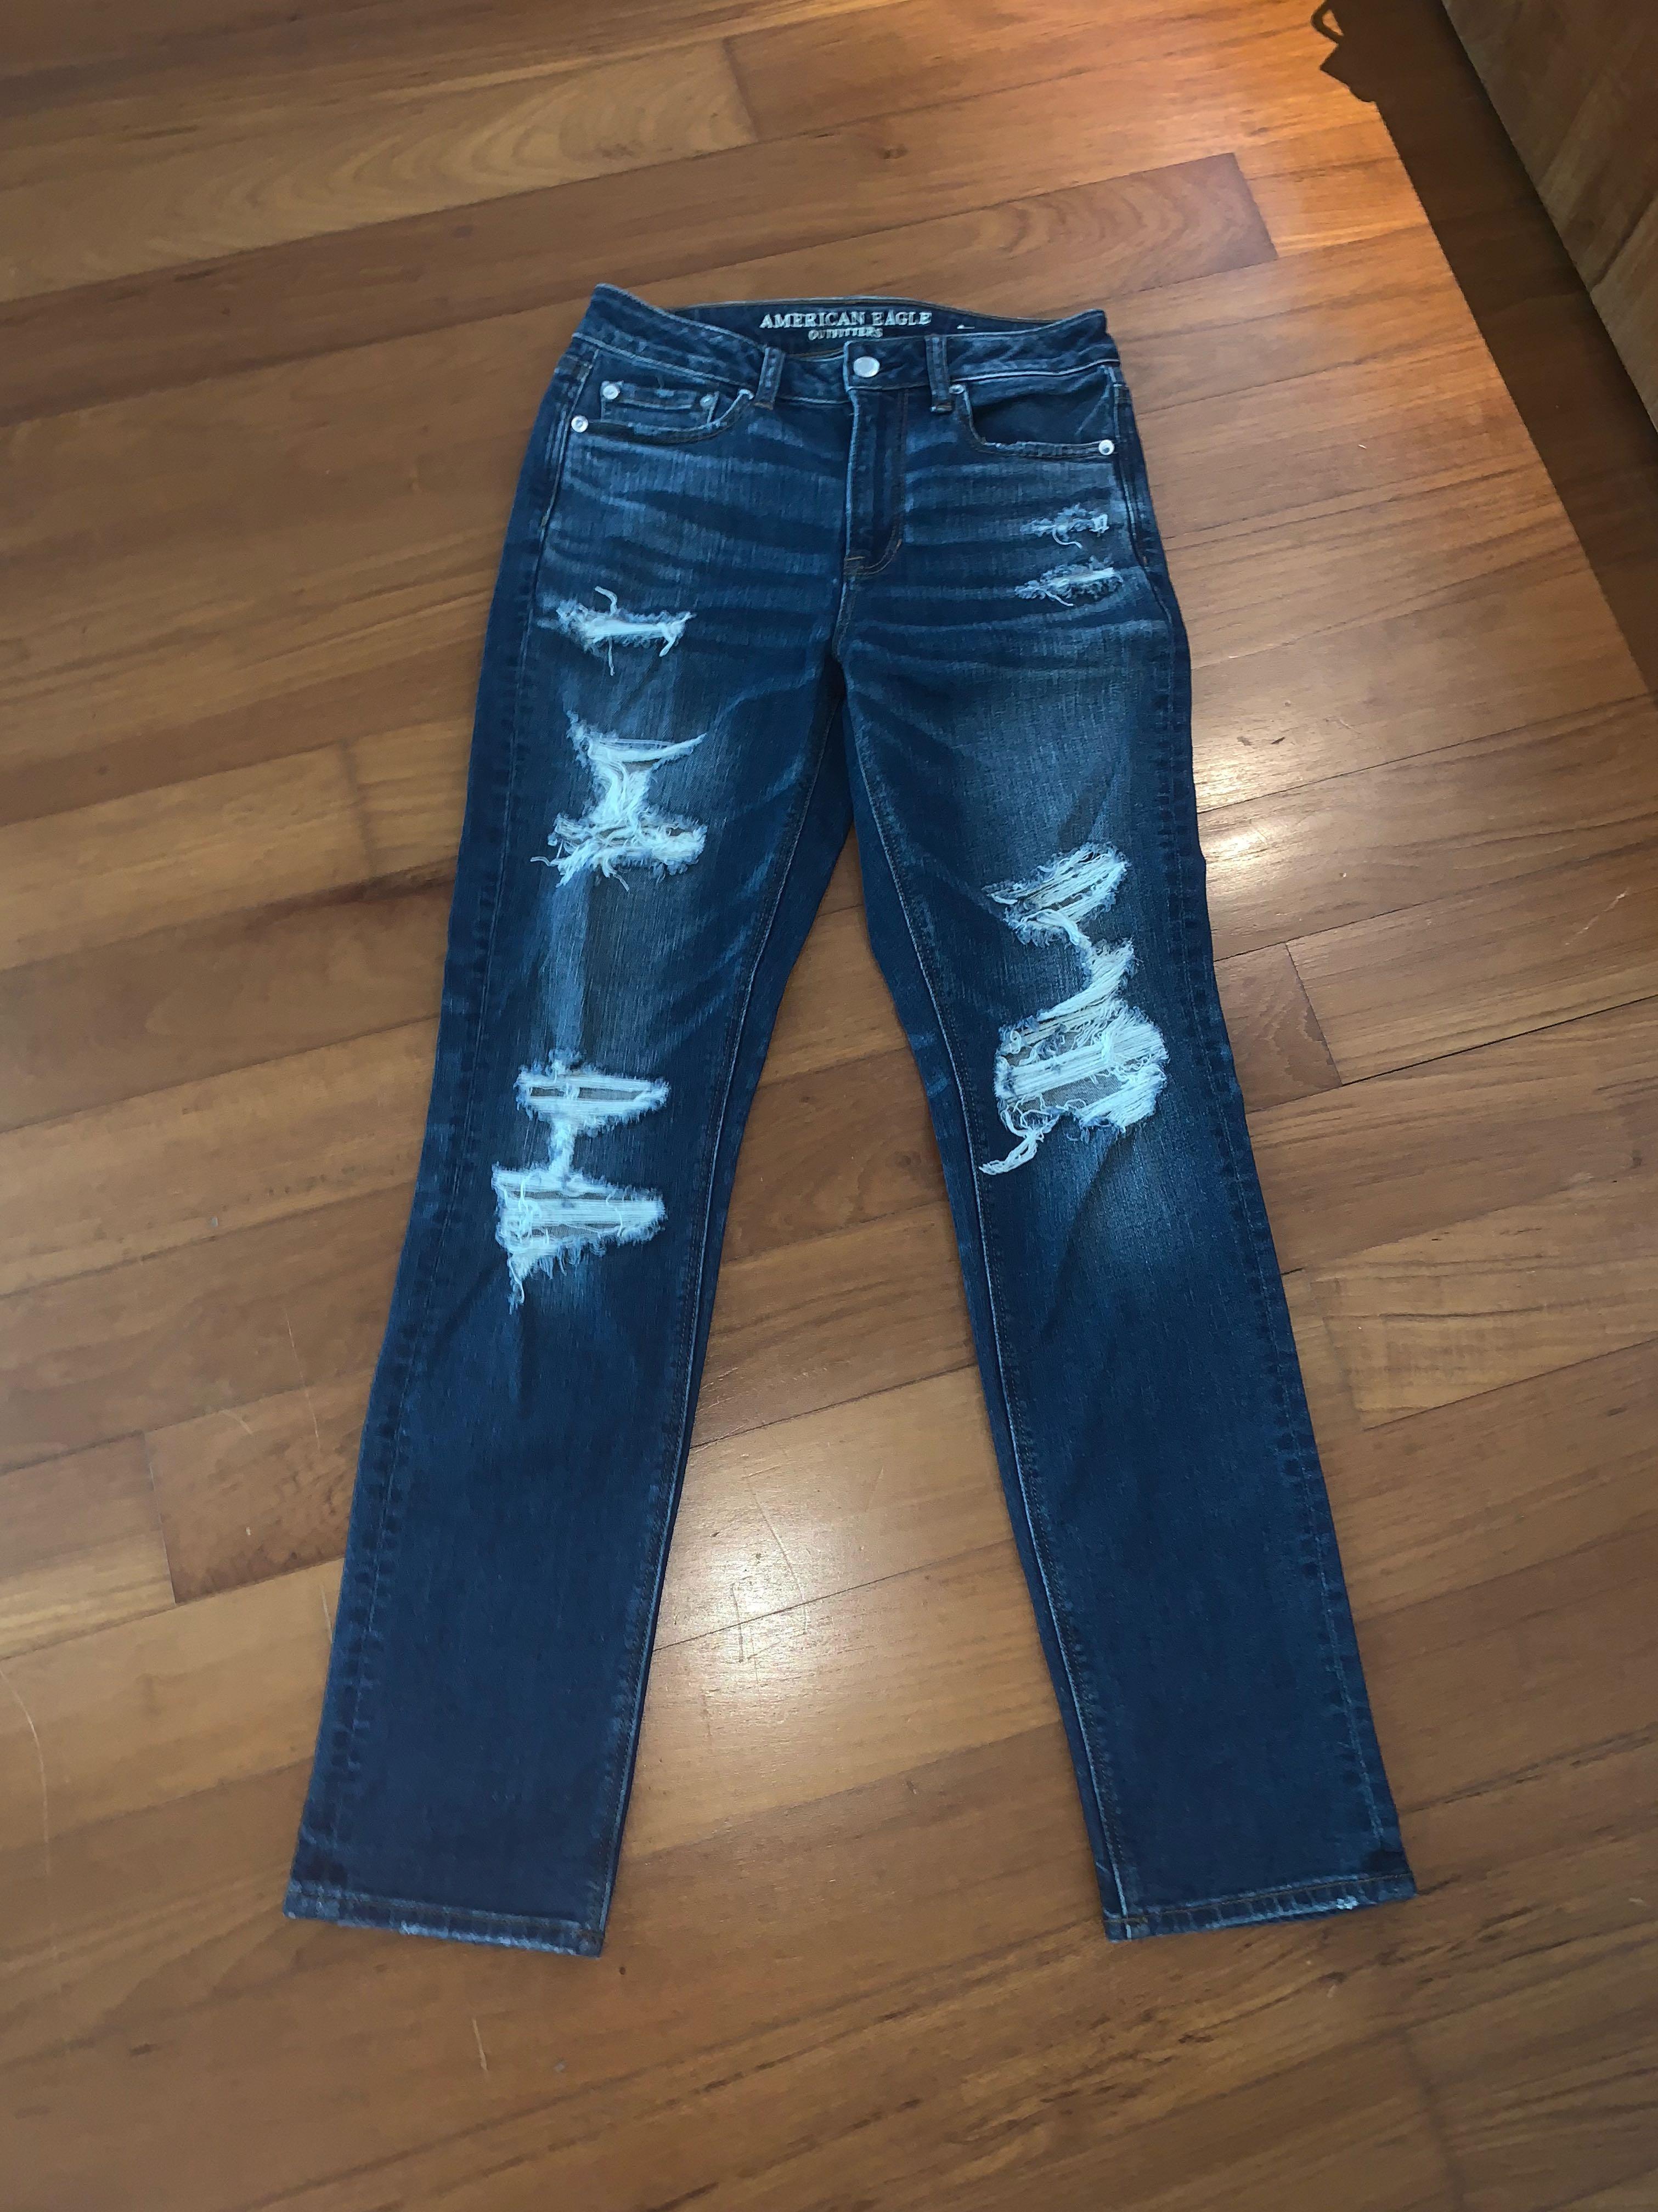 american eagle ripped pants